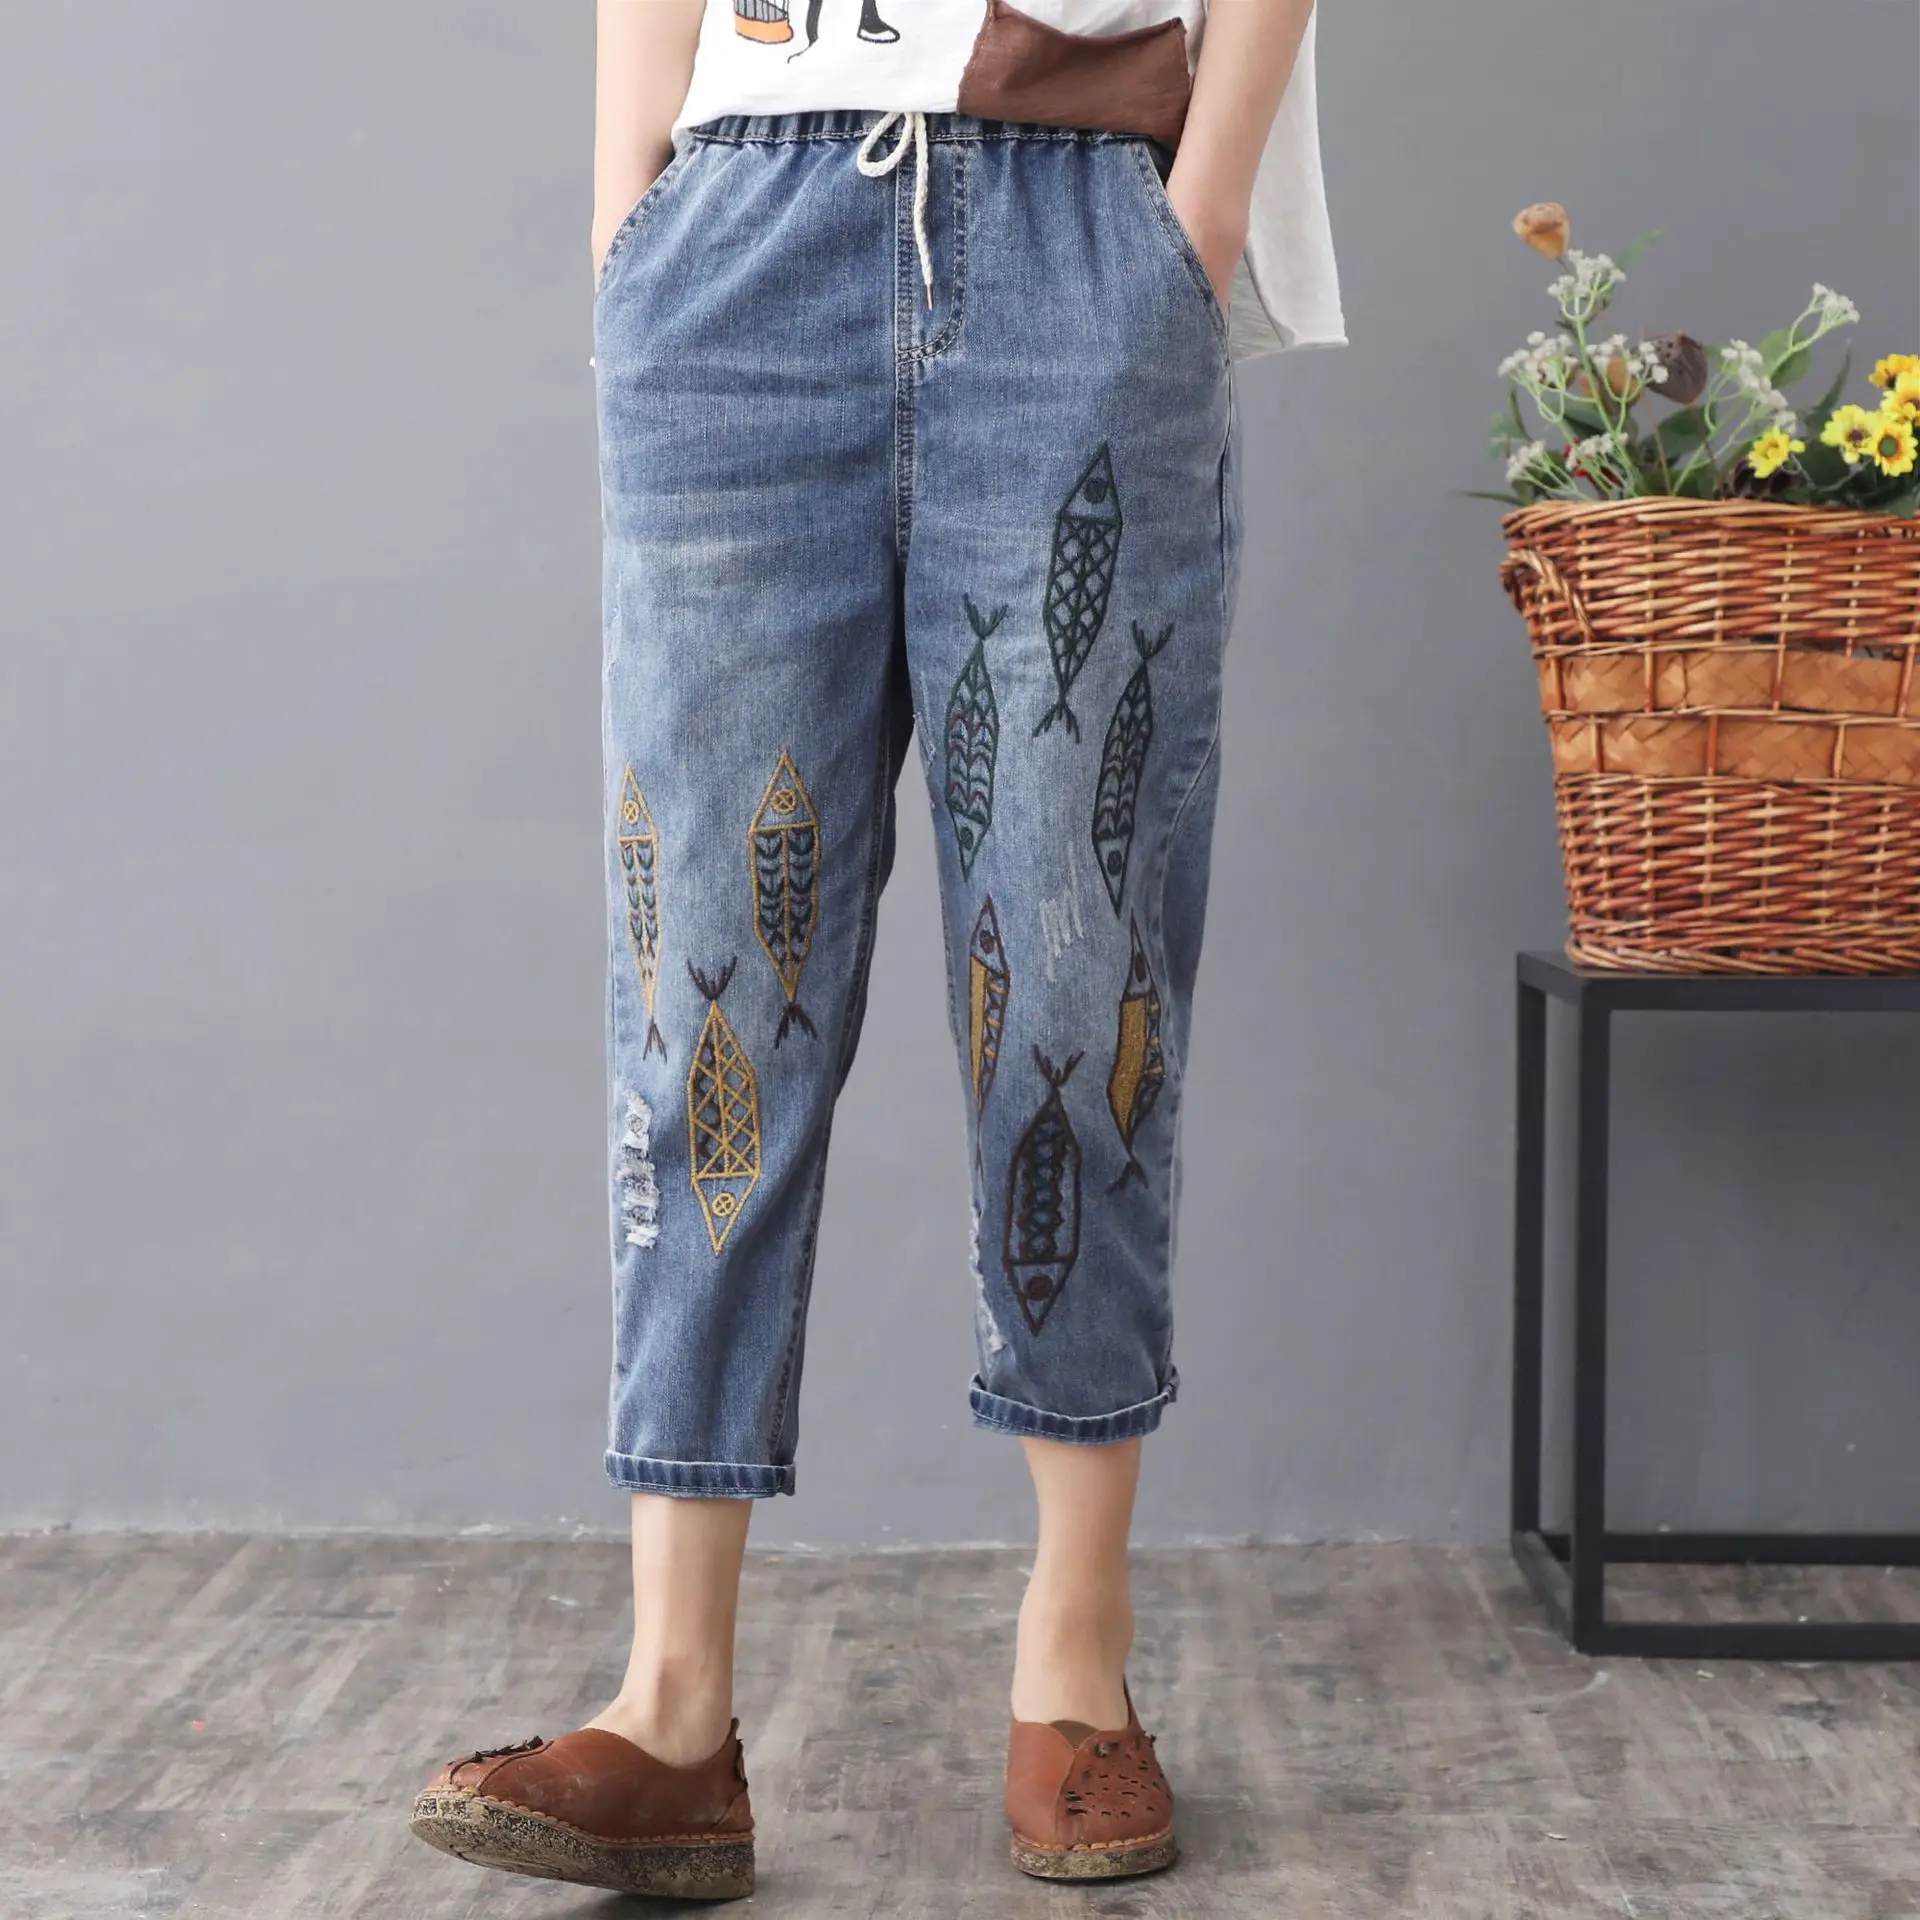 ripped jeans Elastic Waist Jeans Ladies Vintage Embroidery Trousers Women Casual Retro Floral Denim Cowboy Ripped Harem Pants Yalabovso jeans pant Jeans